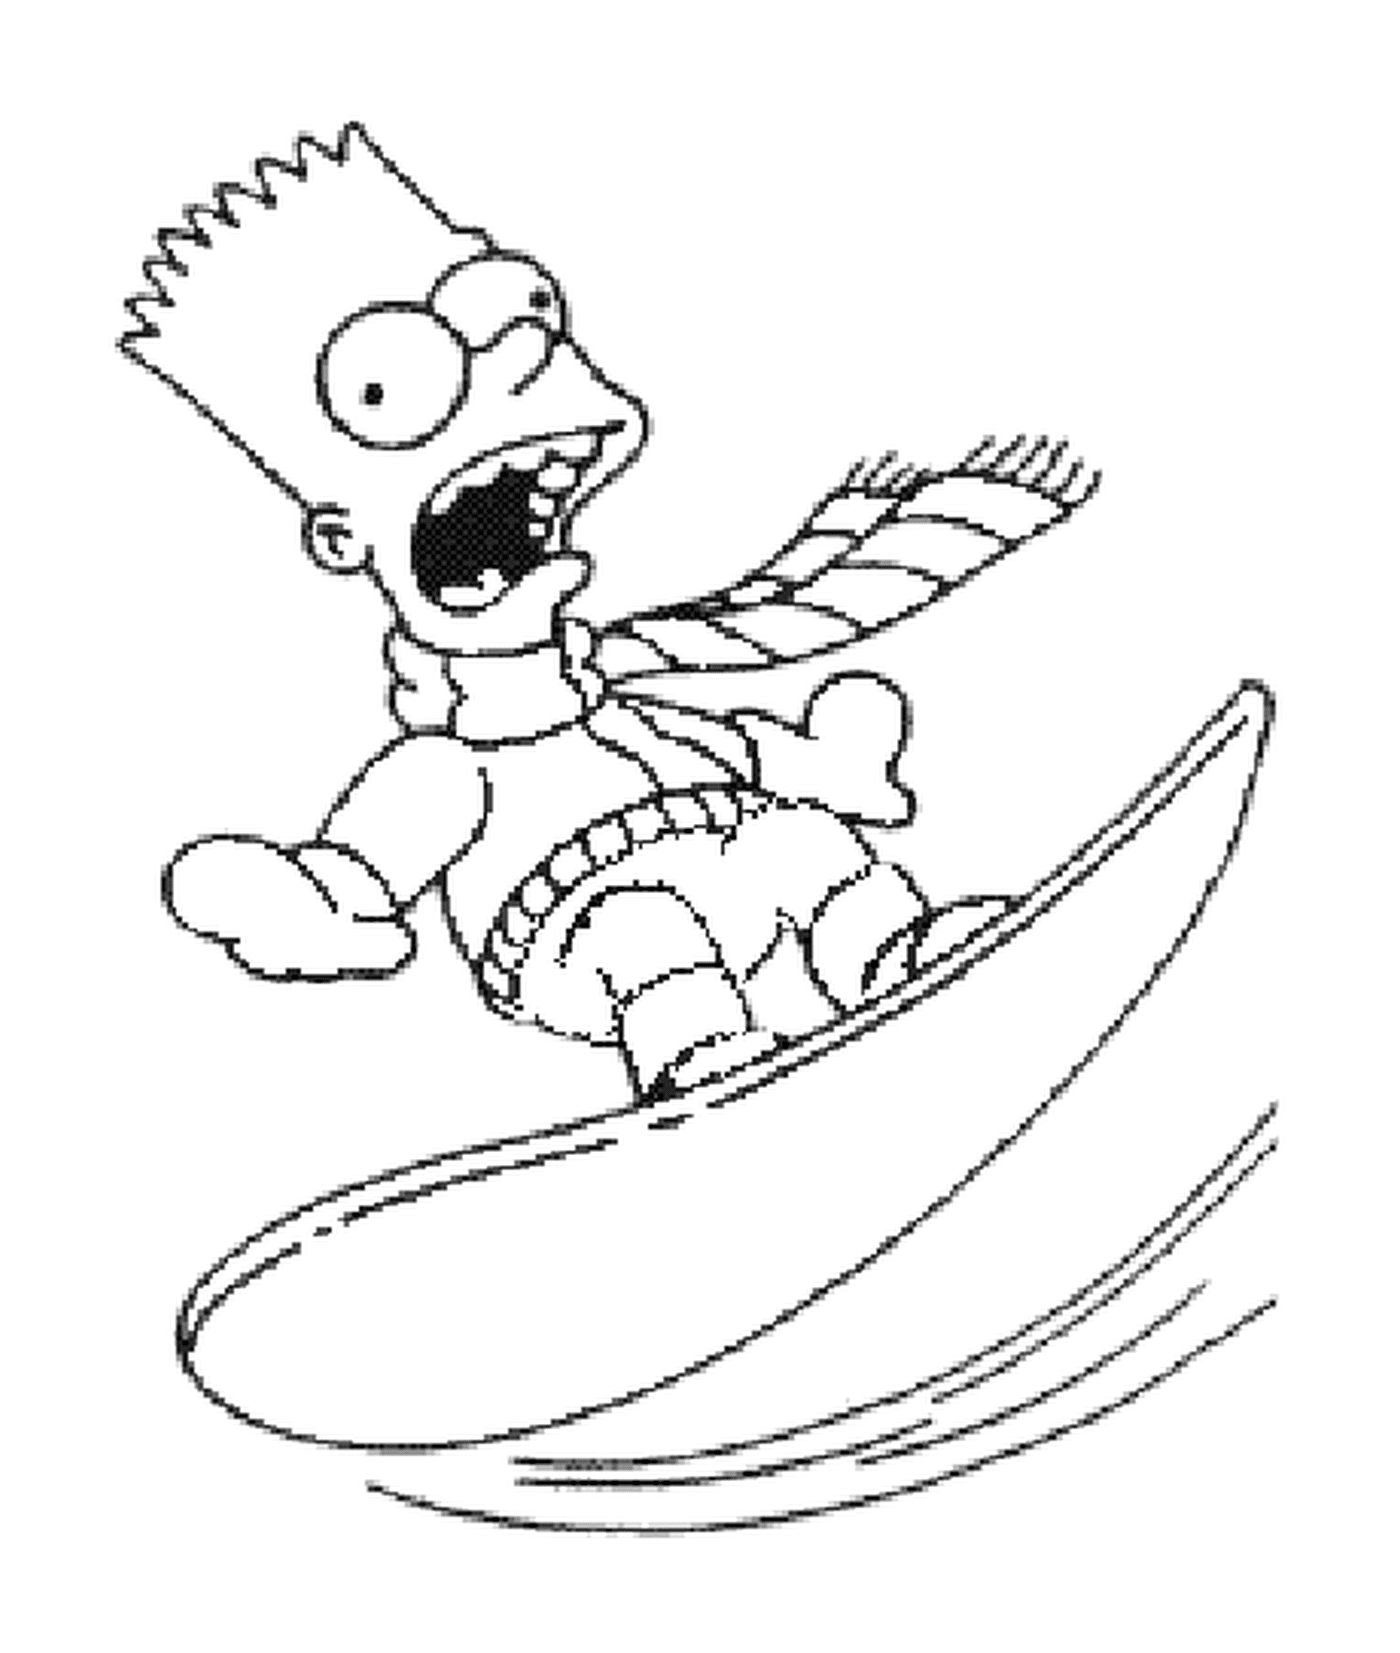  Bart surfs in the snow 